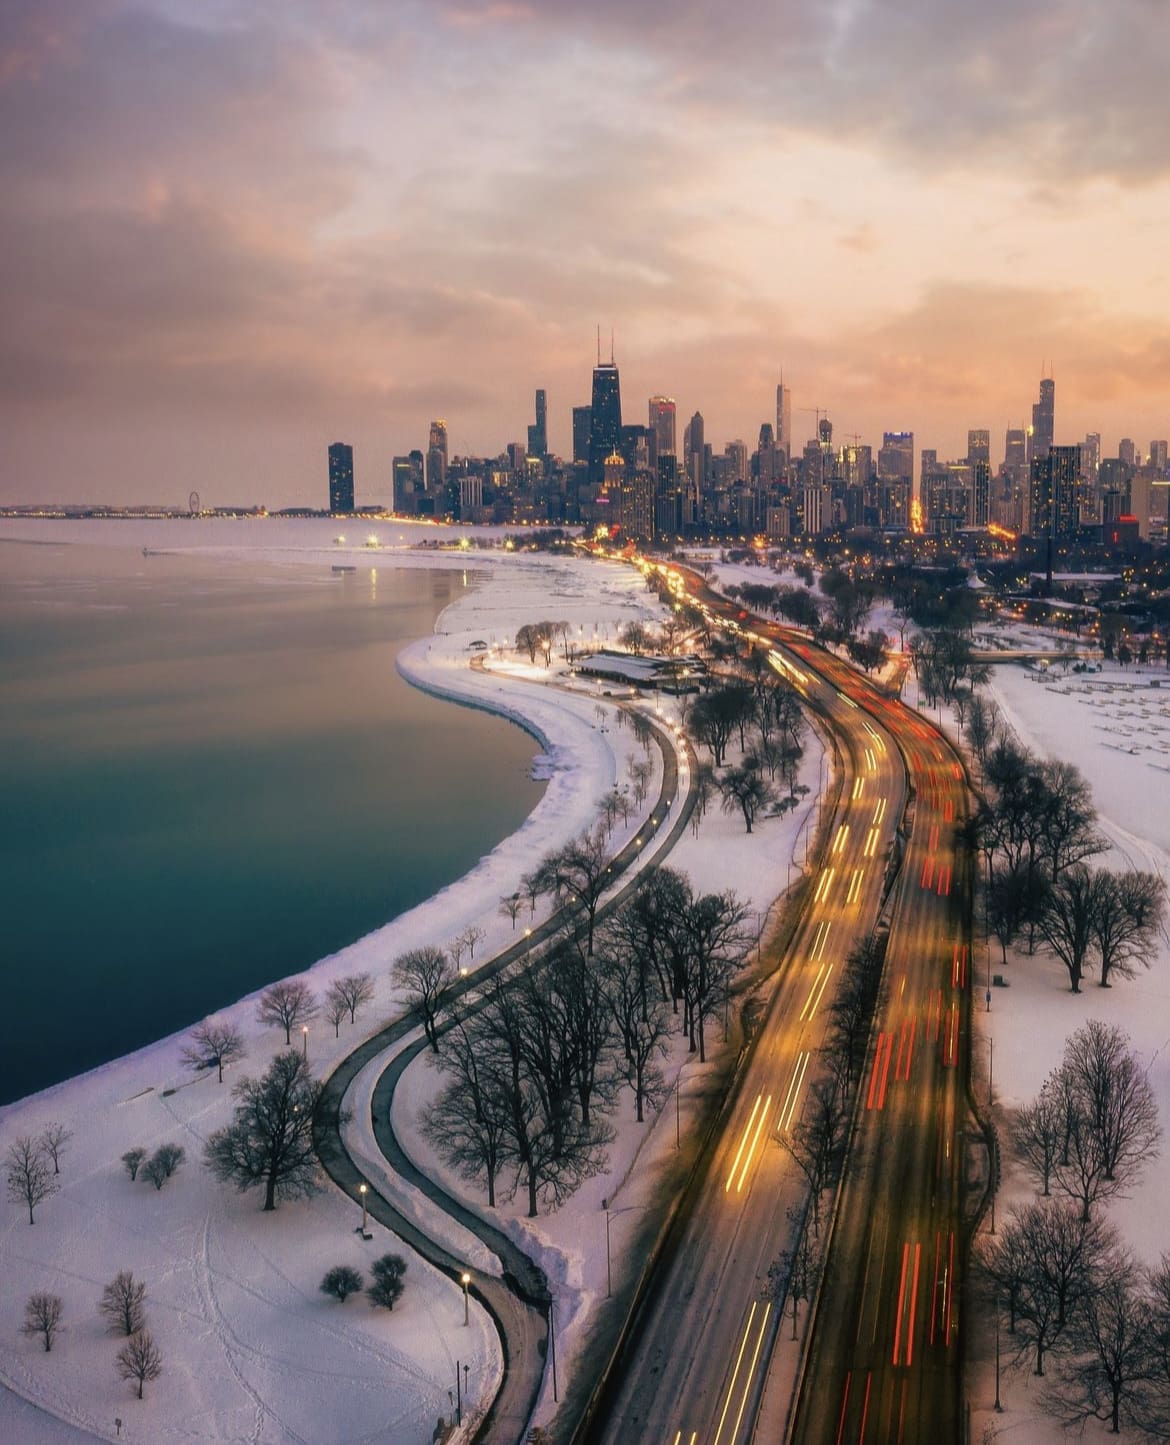 Snowy scenes during winter - The Weather in Chicago, US